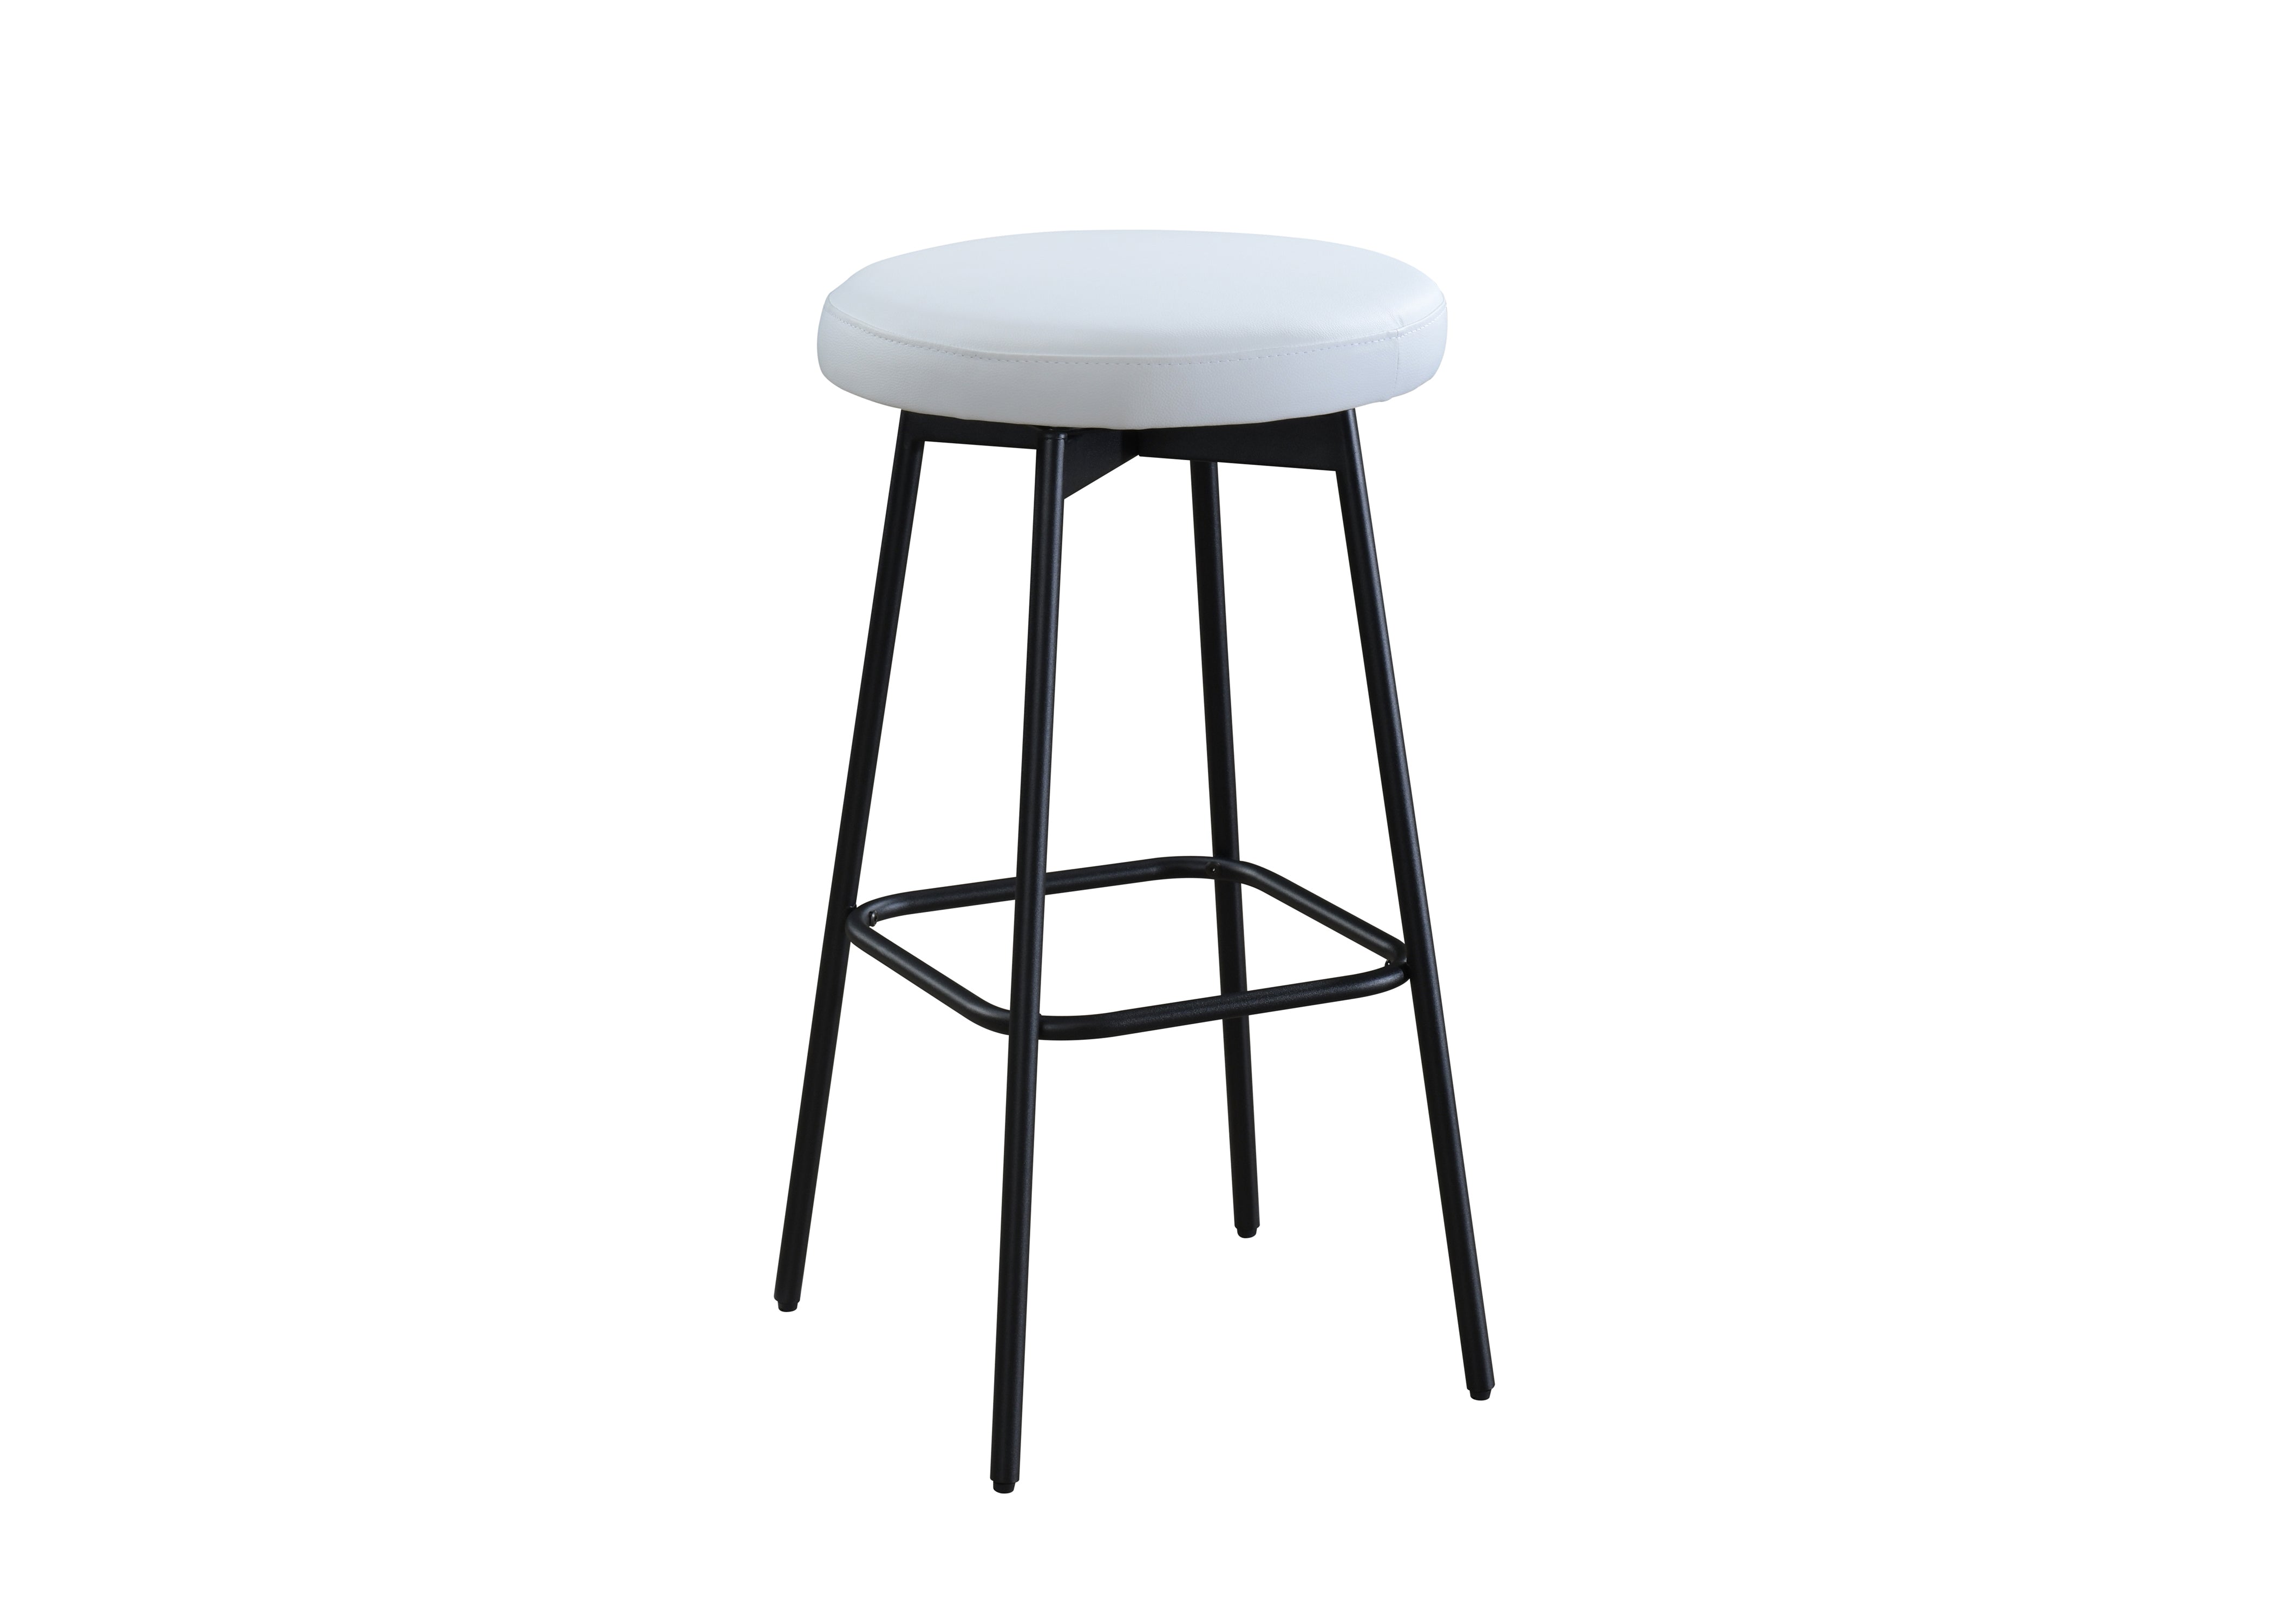 LuXeo Doheny Swivel Barstool - Black Steel Legs With Upholstered Seat (Set of 2)